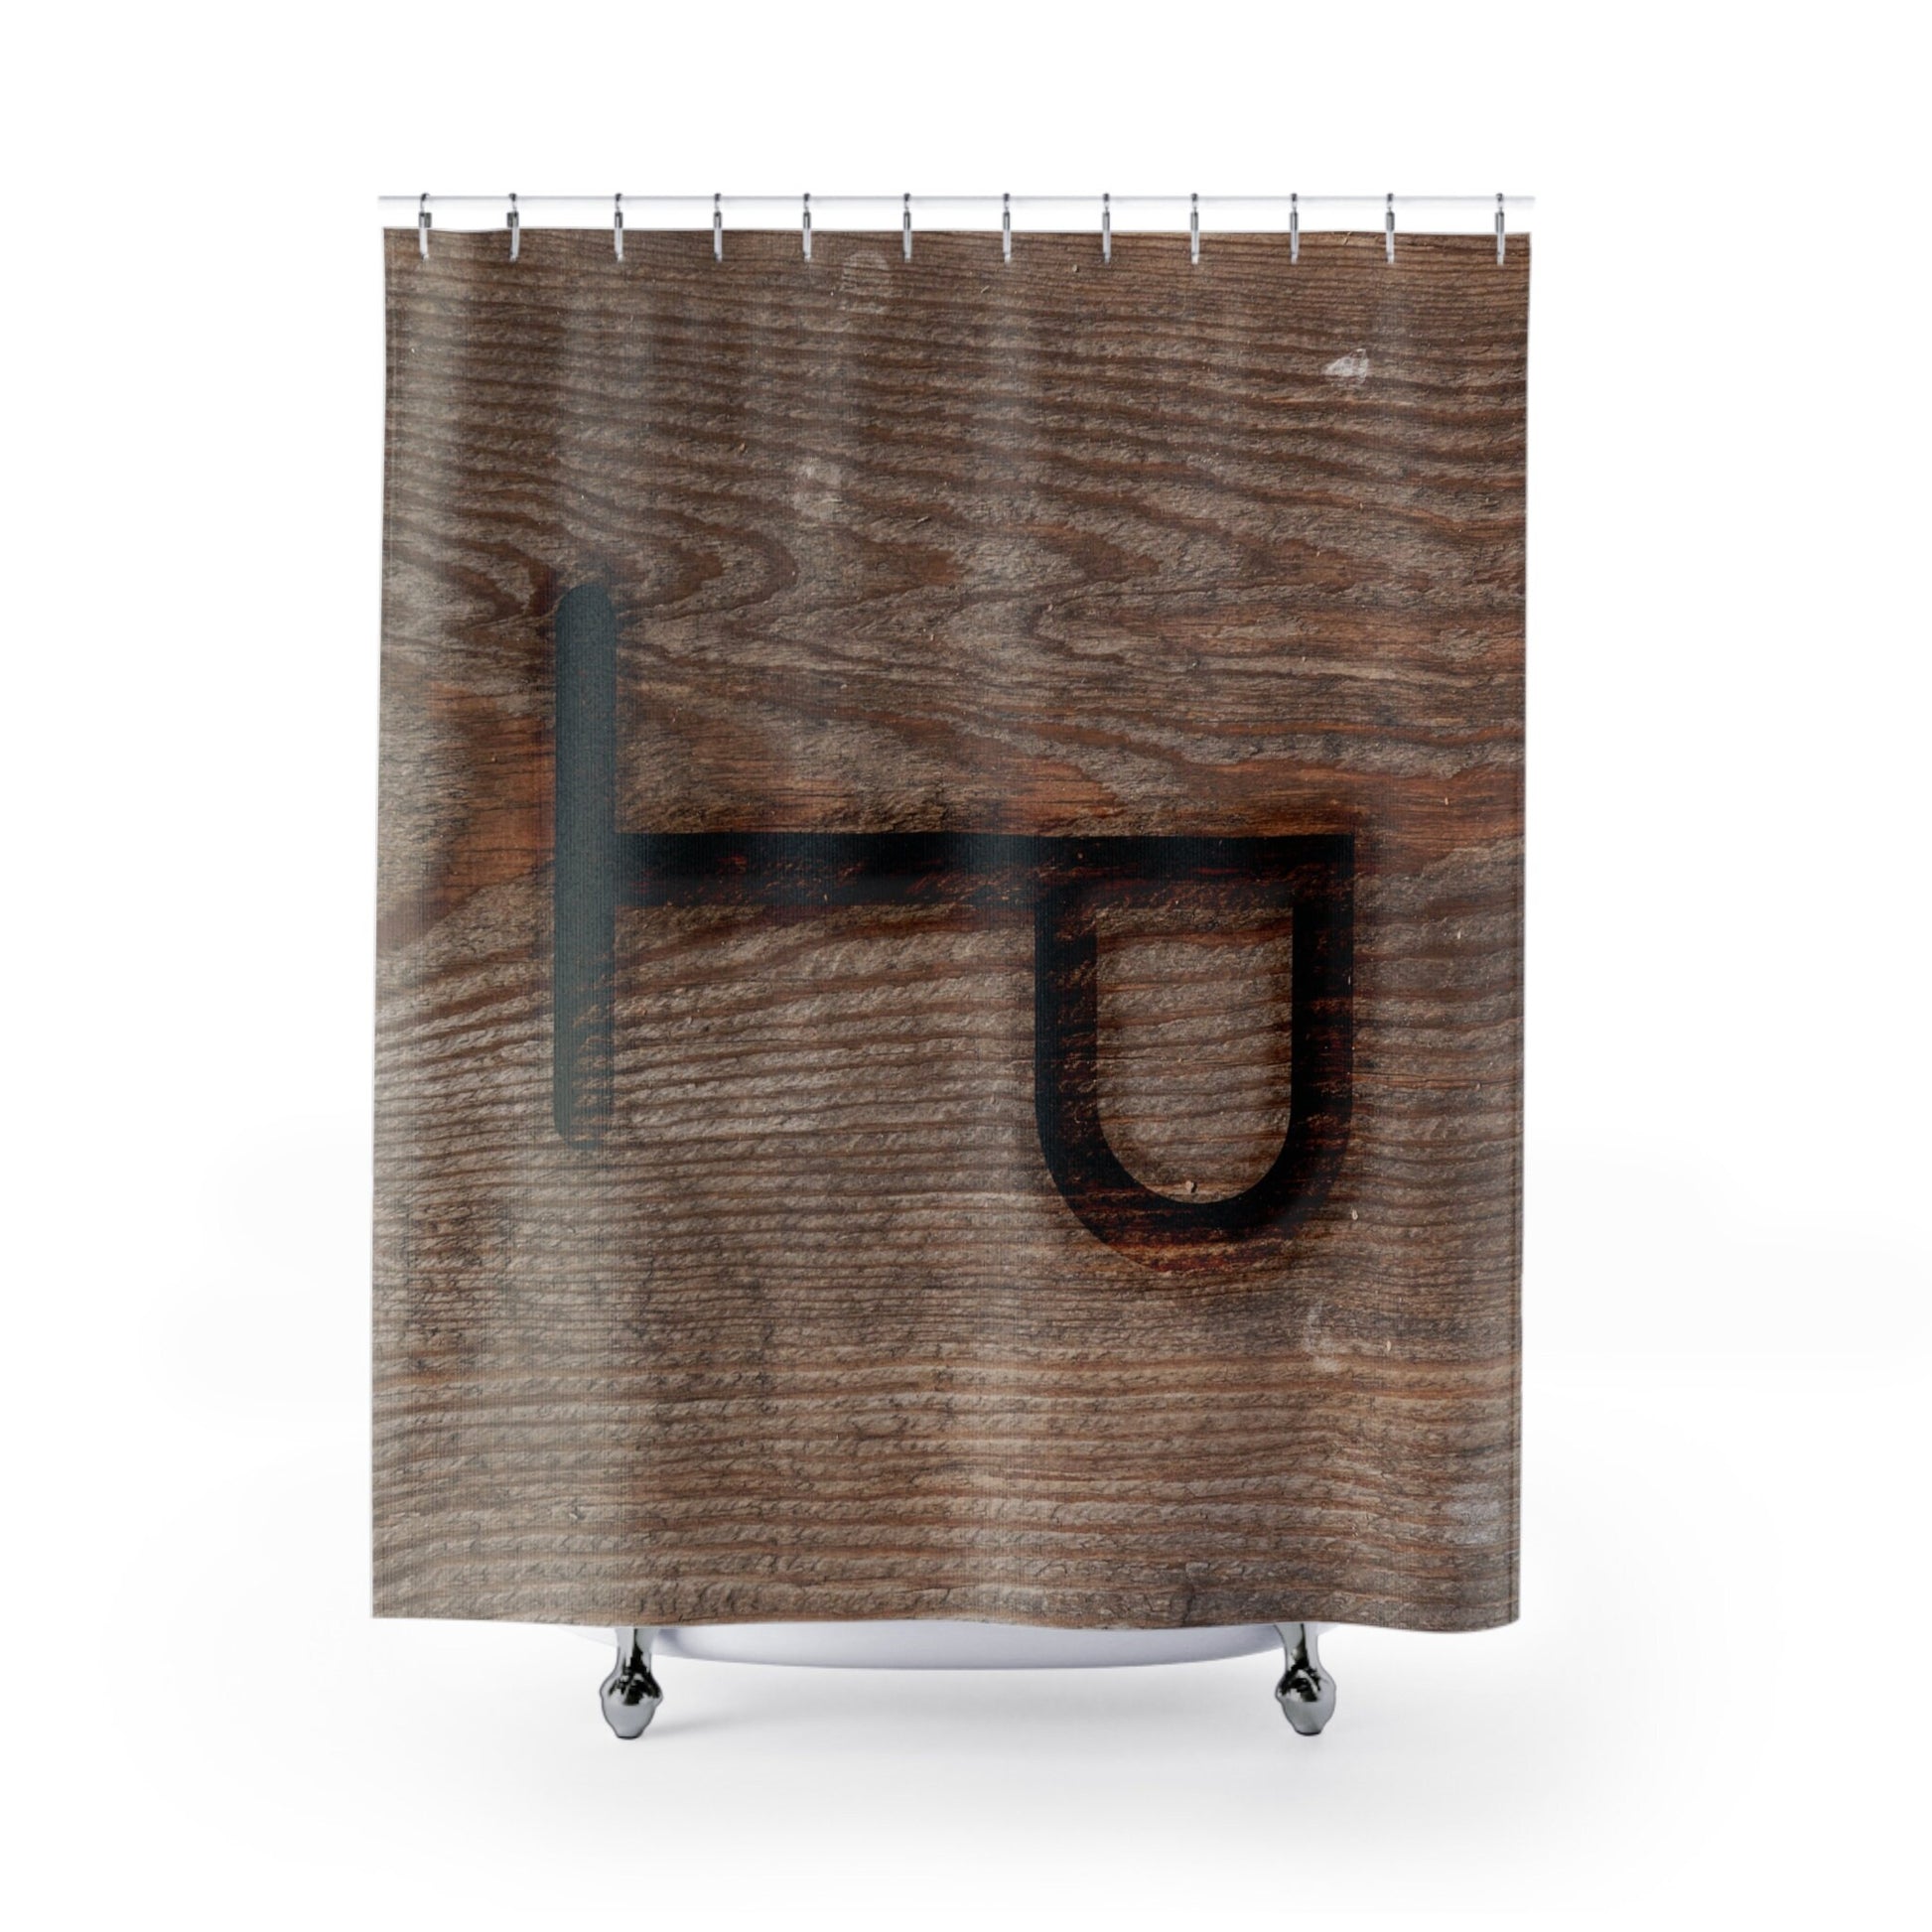 CUSTOM CATTLE BRAND Burned Wood Rustic Western Cowboy Shower Curtain for Ranches or Farms Unique Personalized Gift Idea